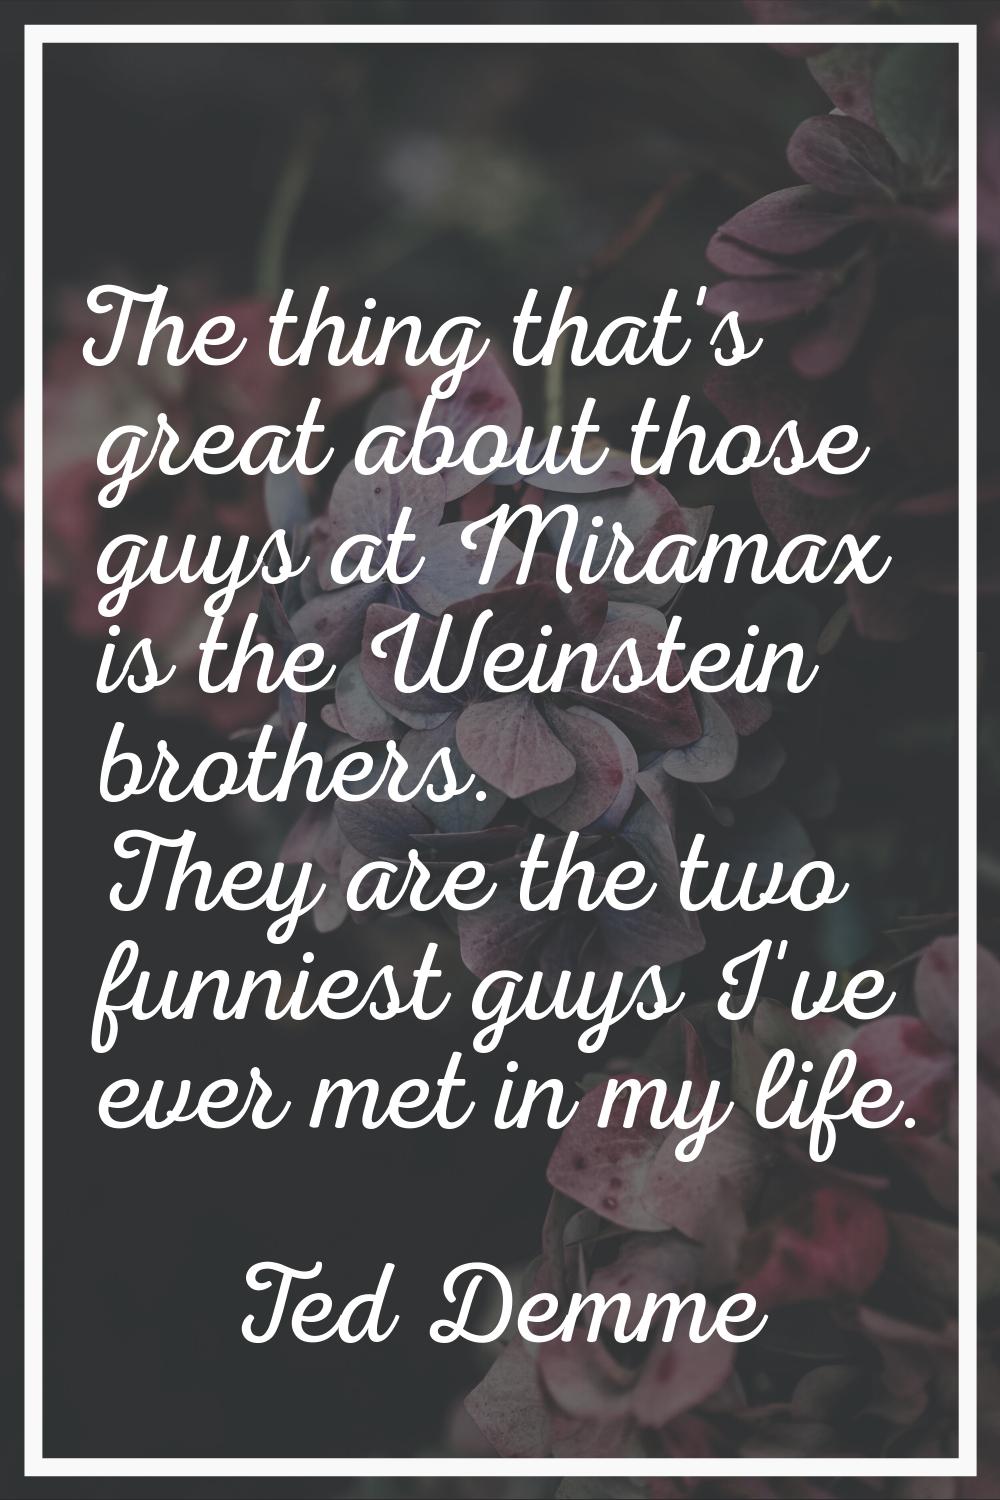 The thing that's great about those guys at Miramax is the Weinstein brothers. They are the two funn